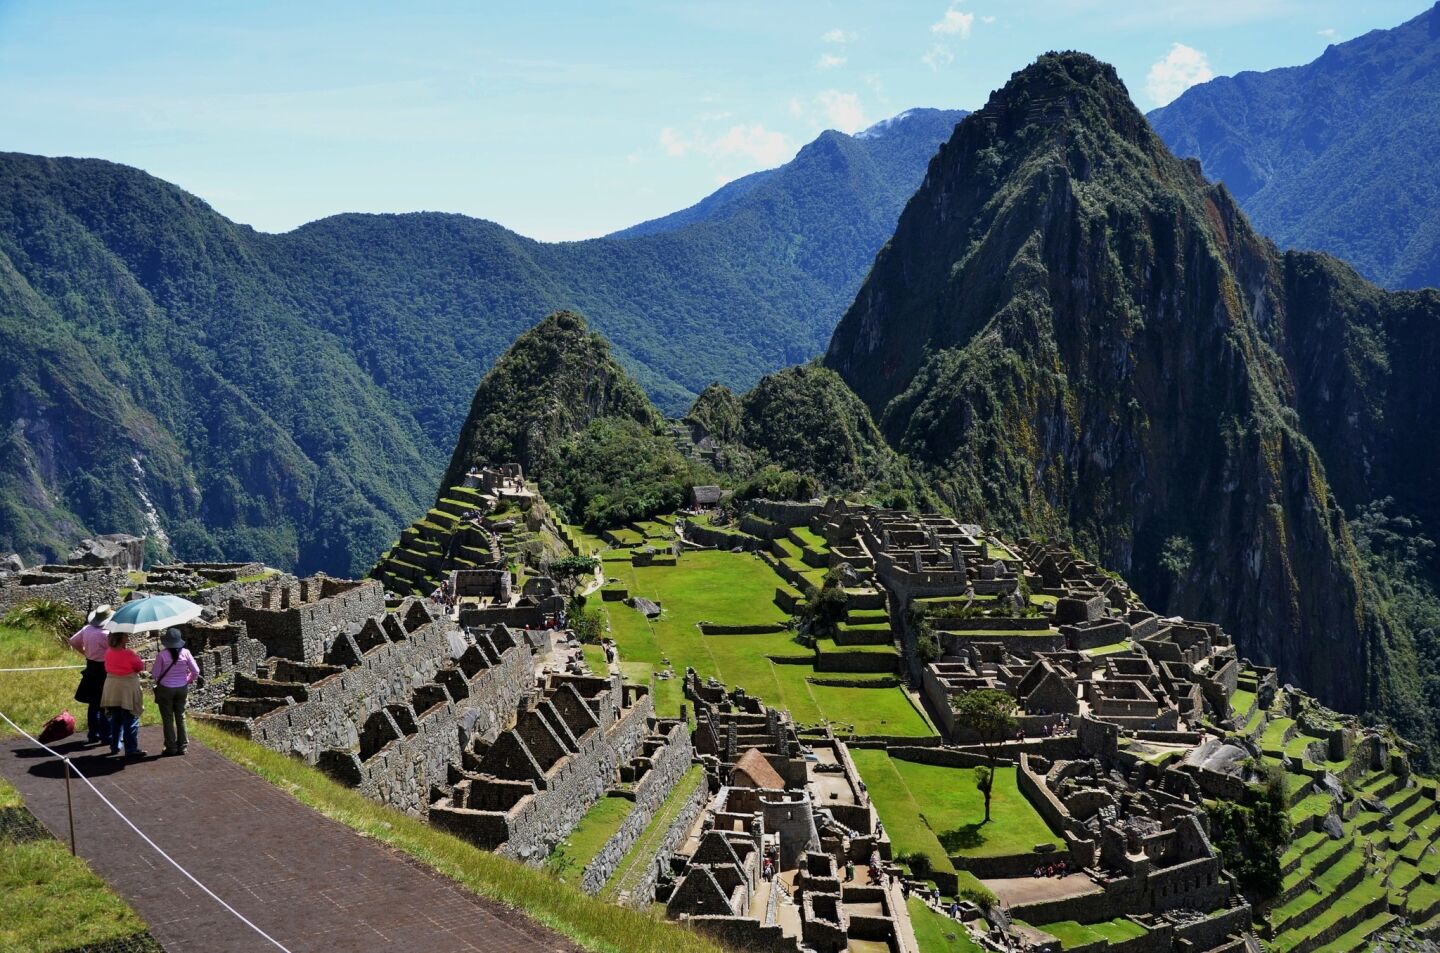 The classic Machu Picchu view from just below the site's ancient guardhouse.